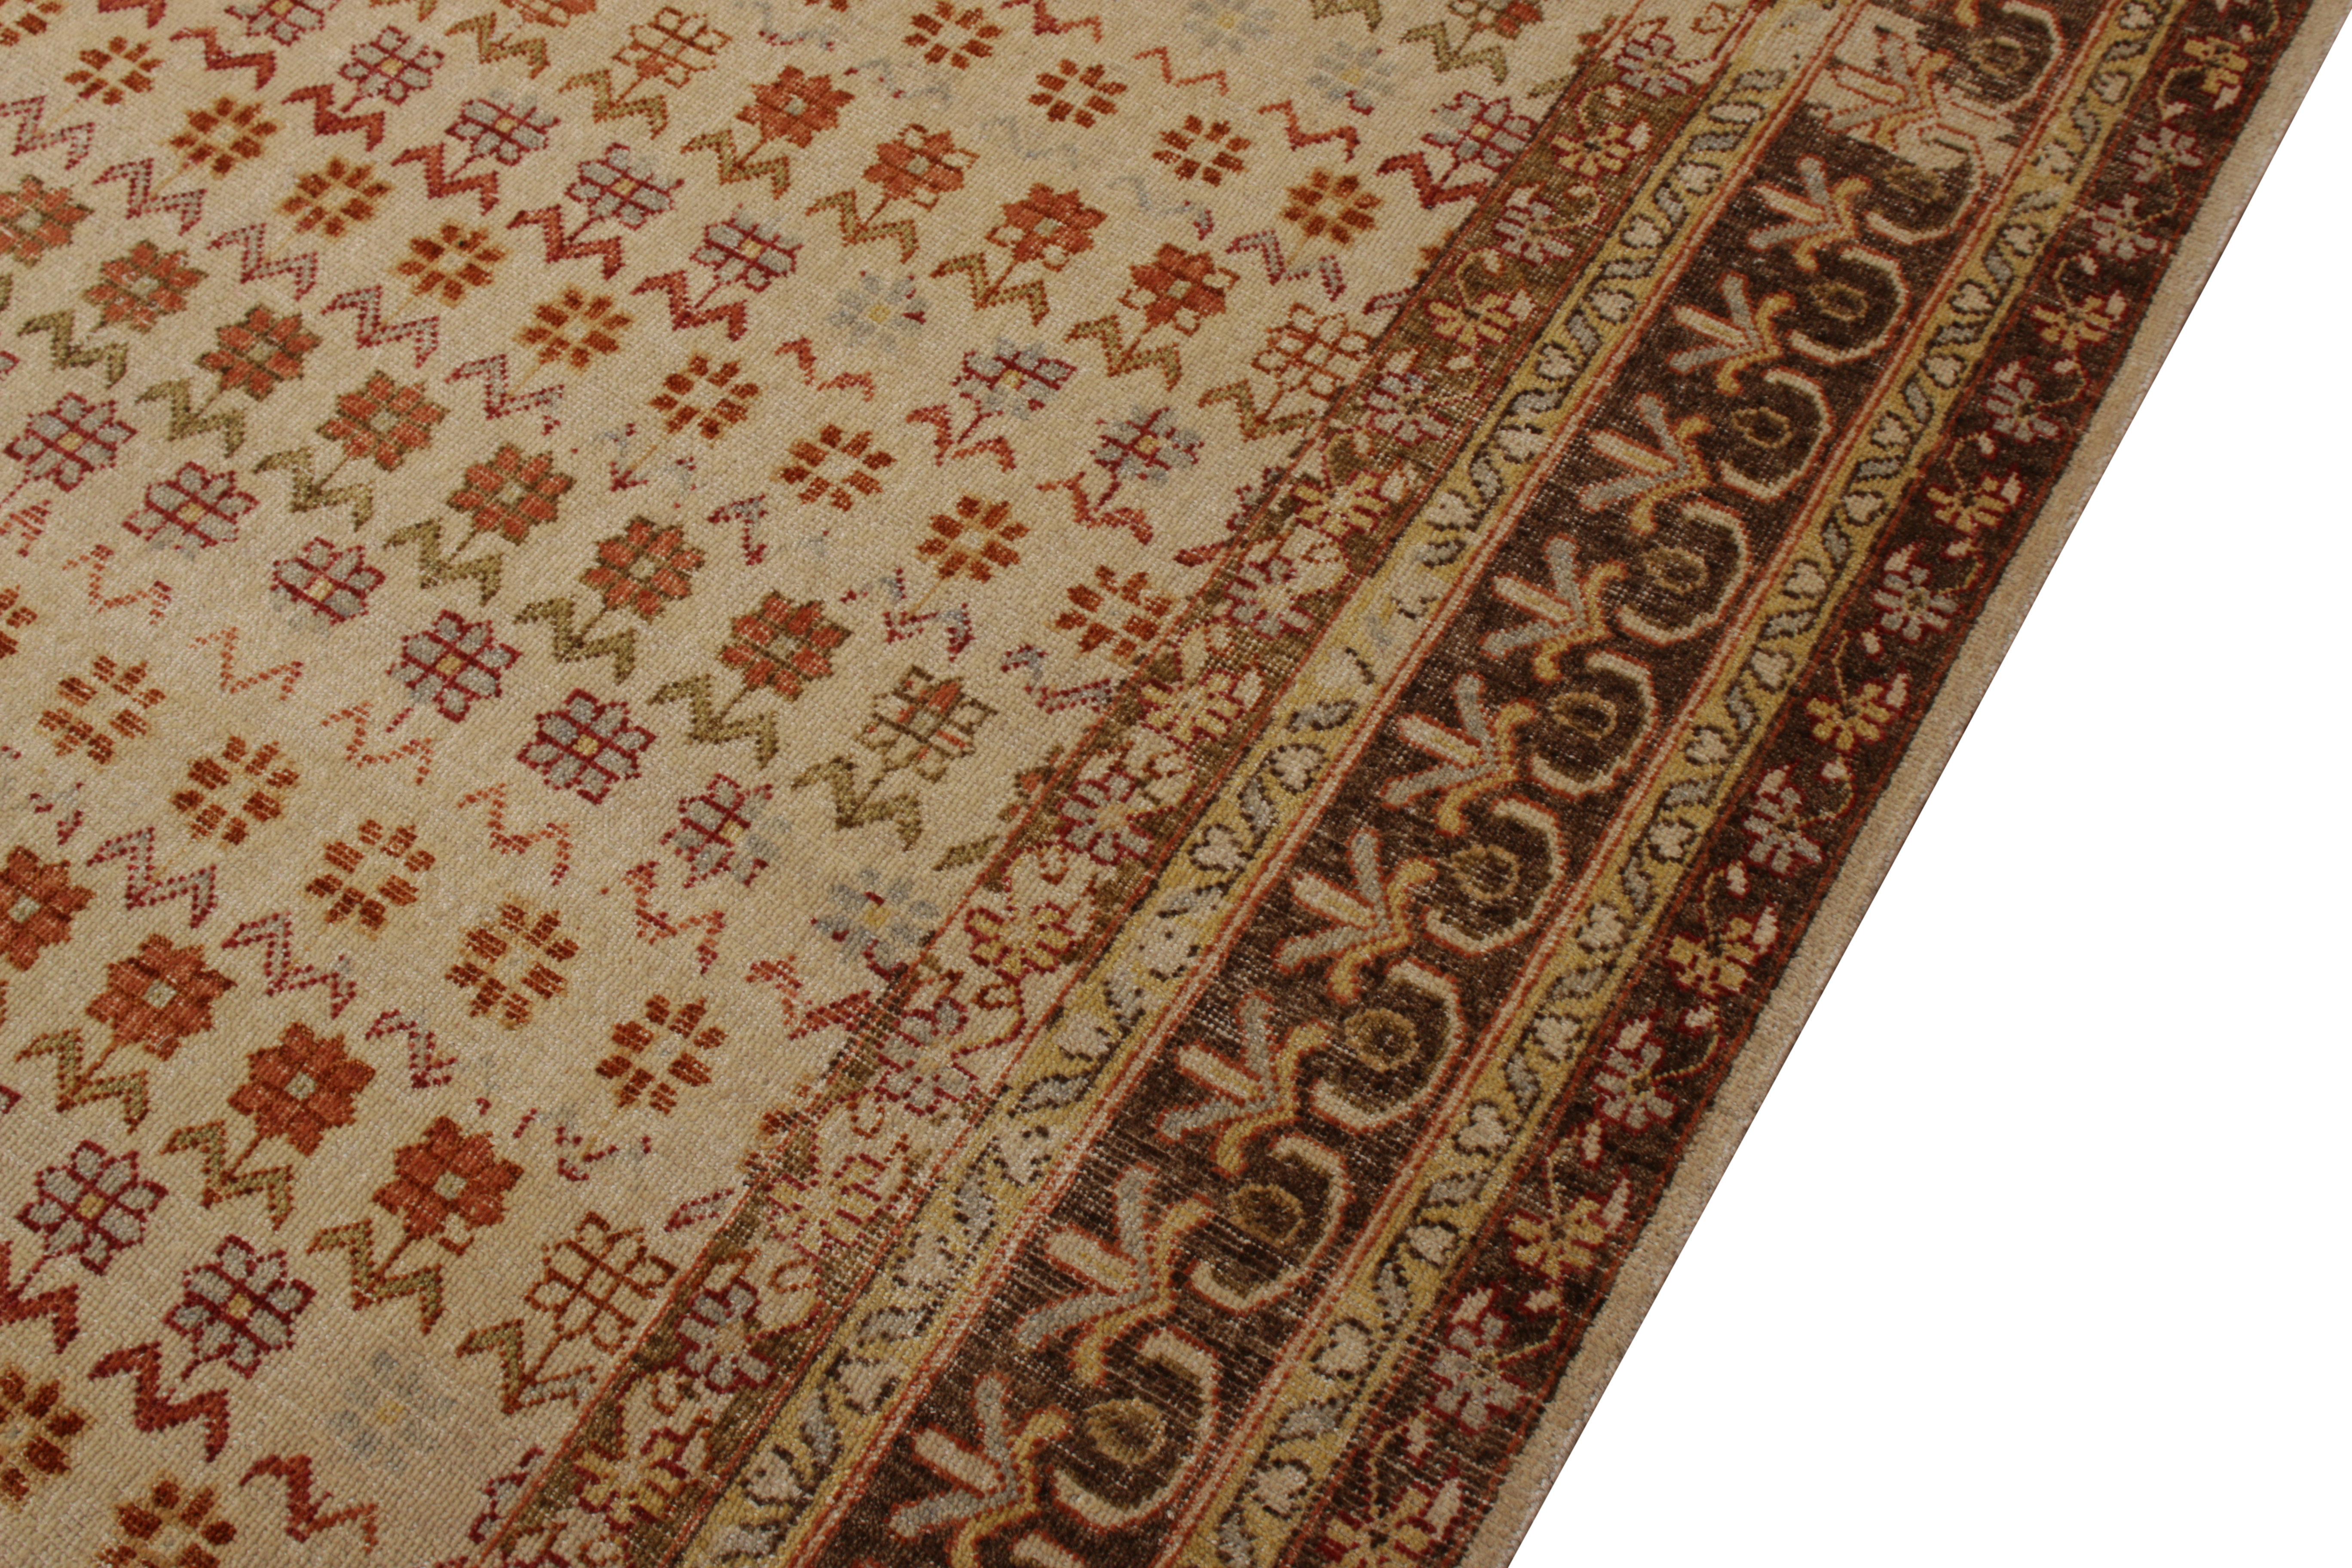 Contemporary Rug & Kilim's Hand Knotted Agra Style Rug Beige Brown Striped Floral Pattern